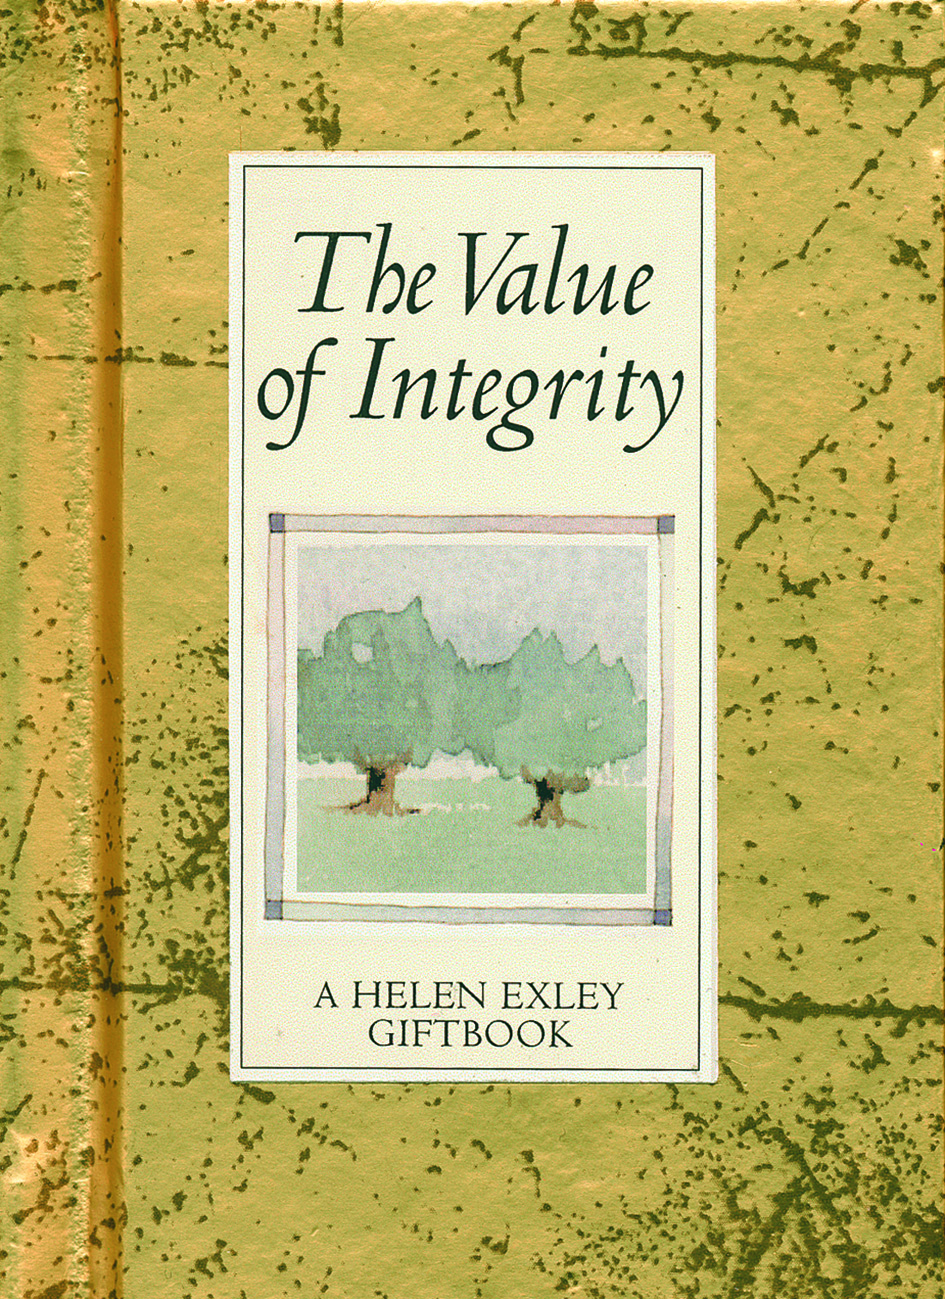 HE VALUES The Value of Integrity